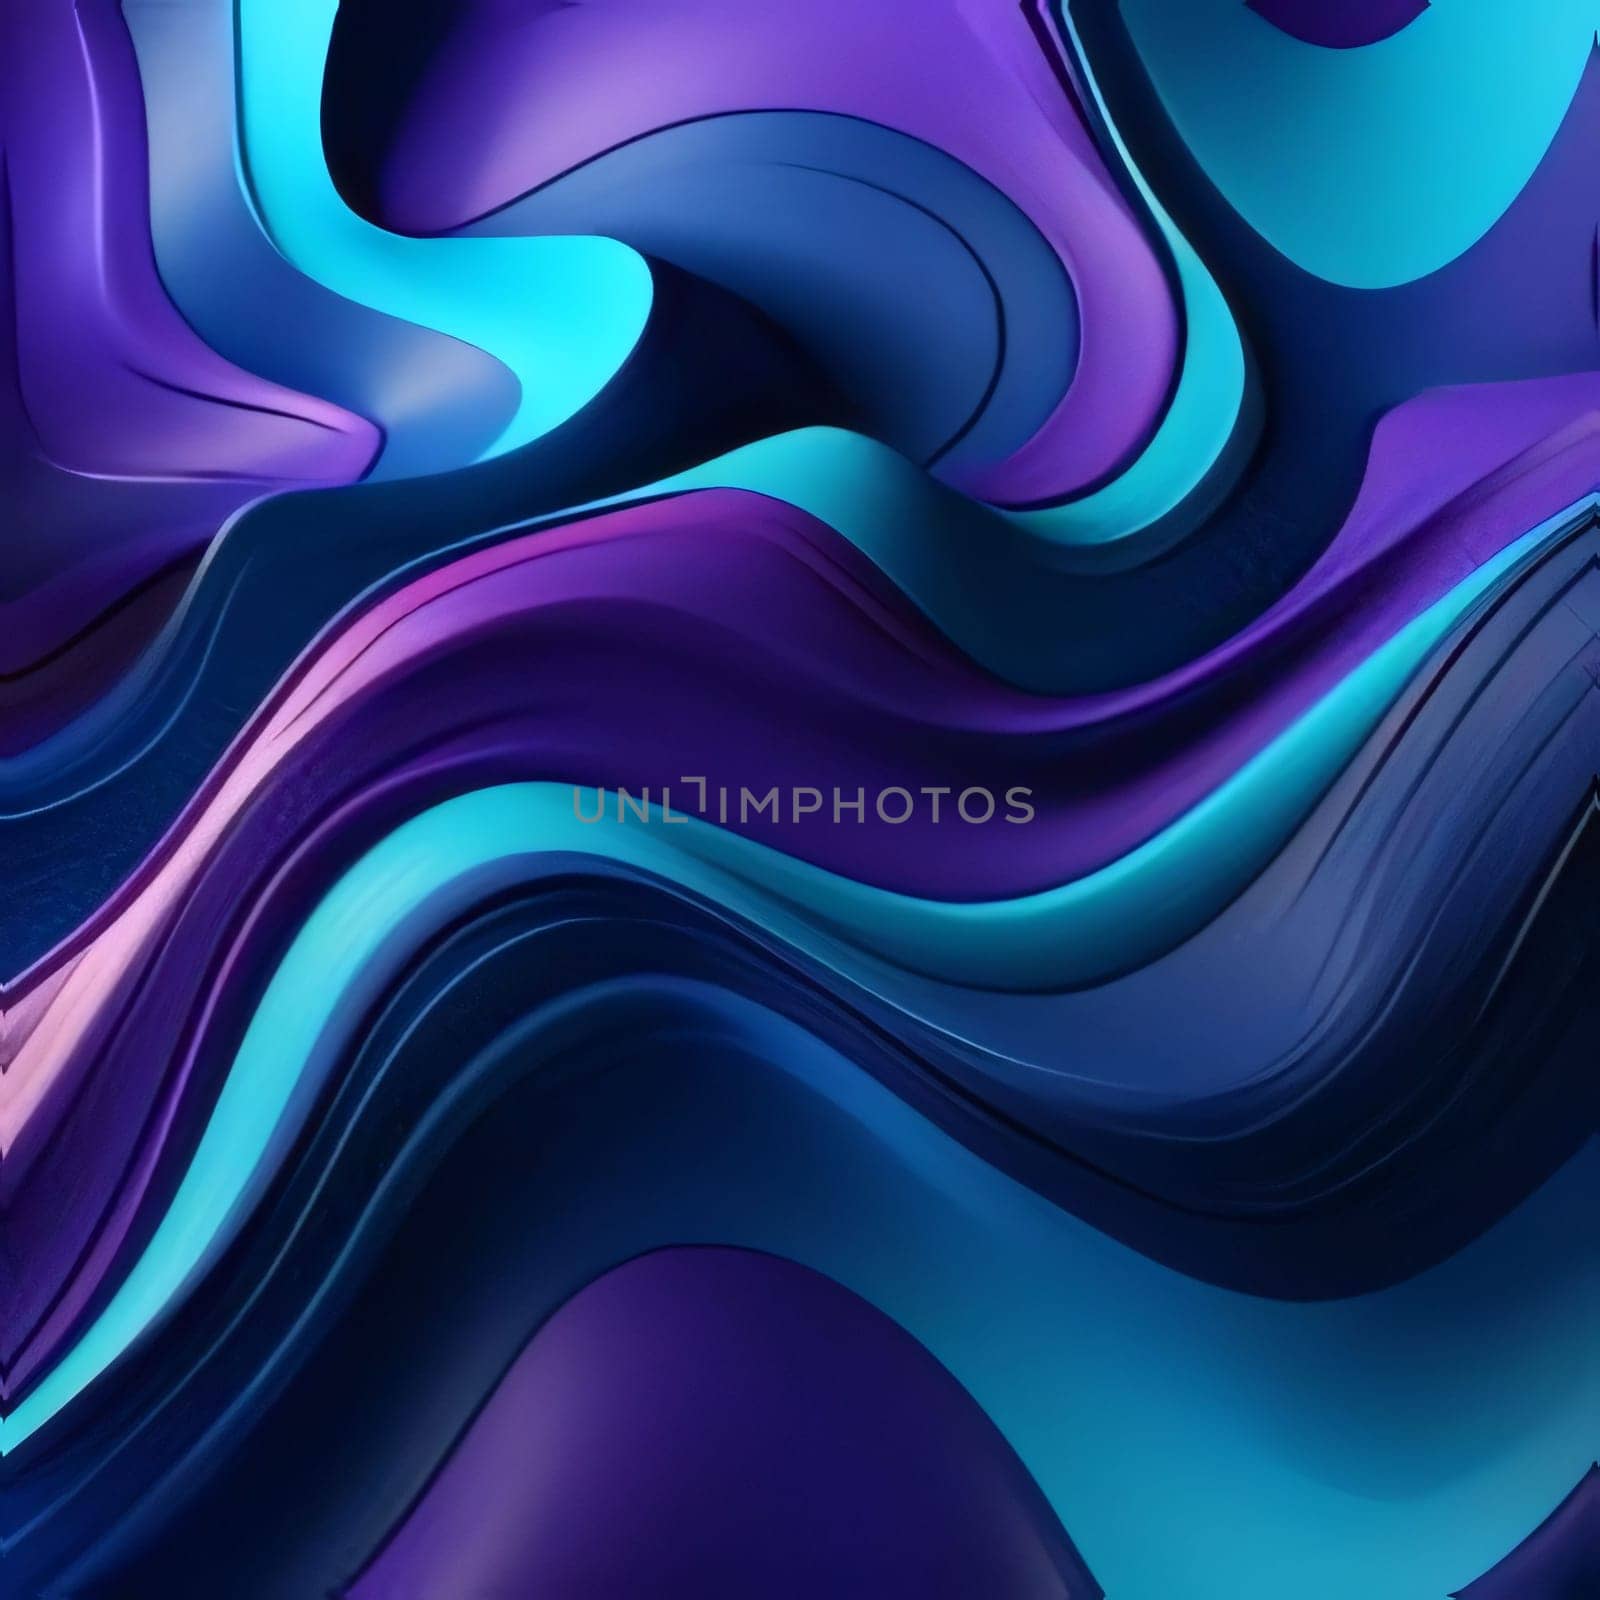 Abstract background design: 3d rendering of abstract wavy background in blue and purple colors